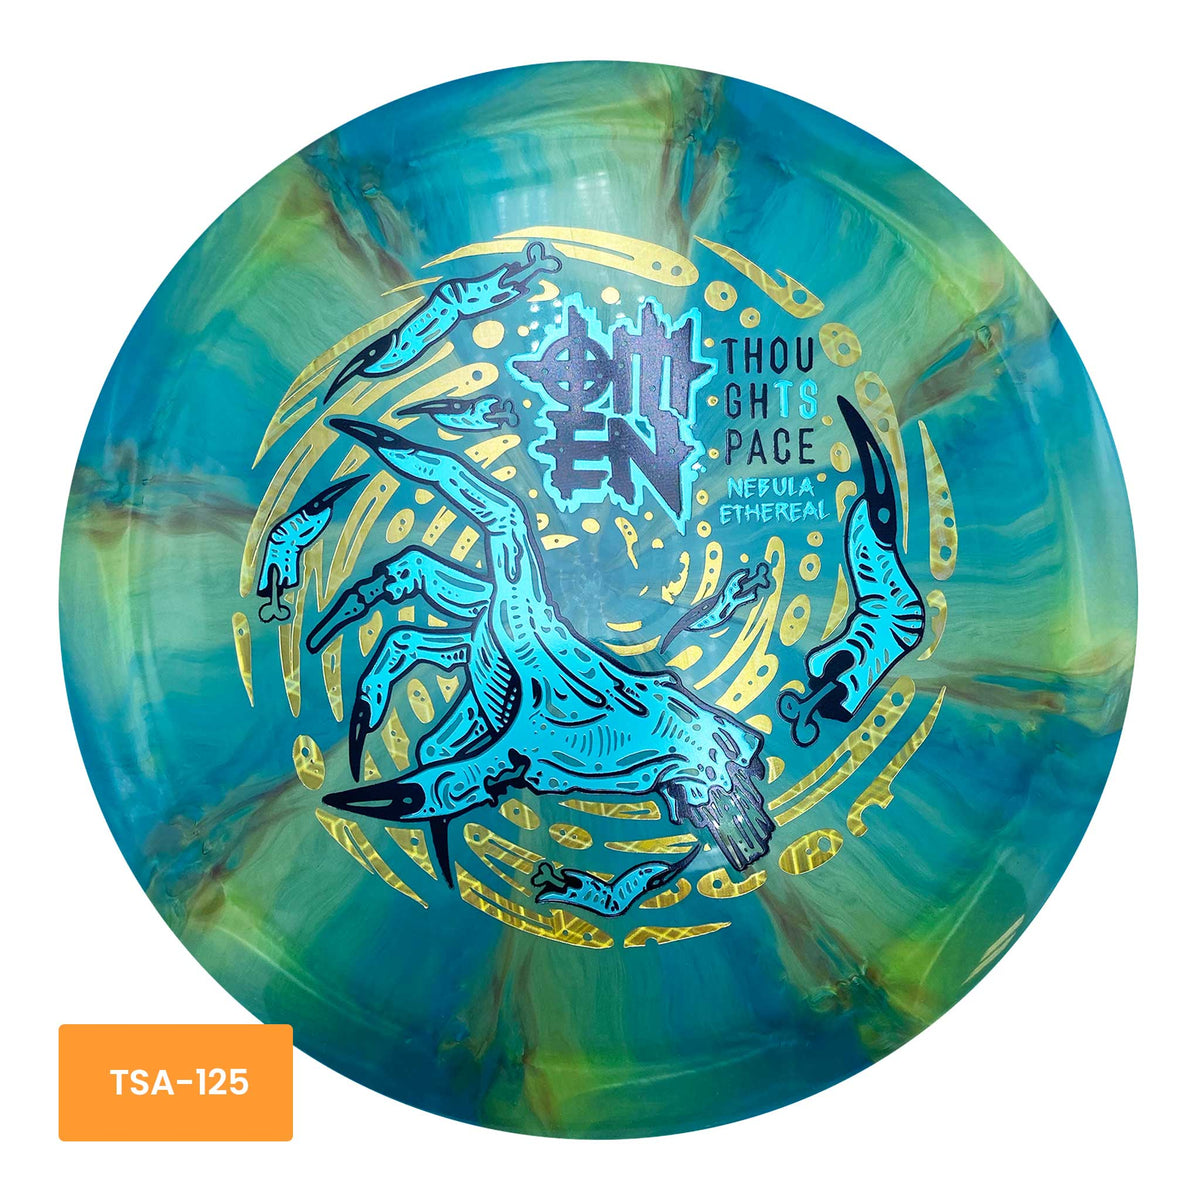 Thought Space Athletics Nebula Ethereal Omen driver - Blue/Green